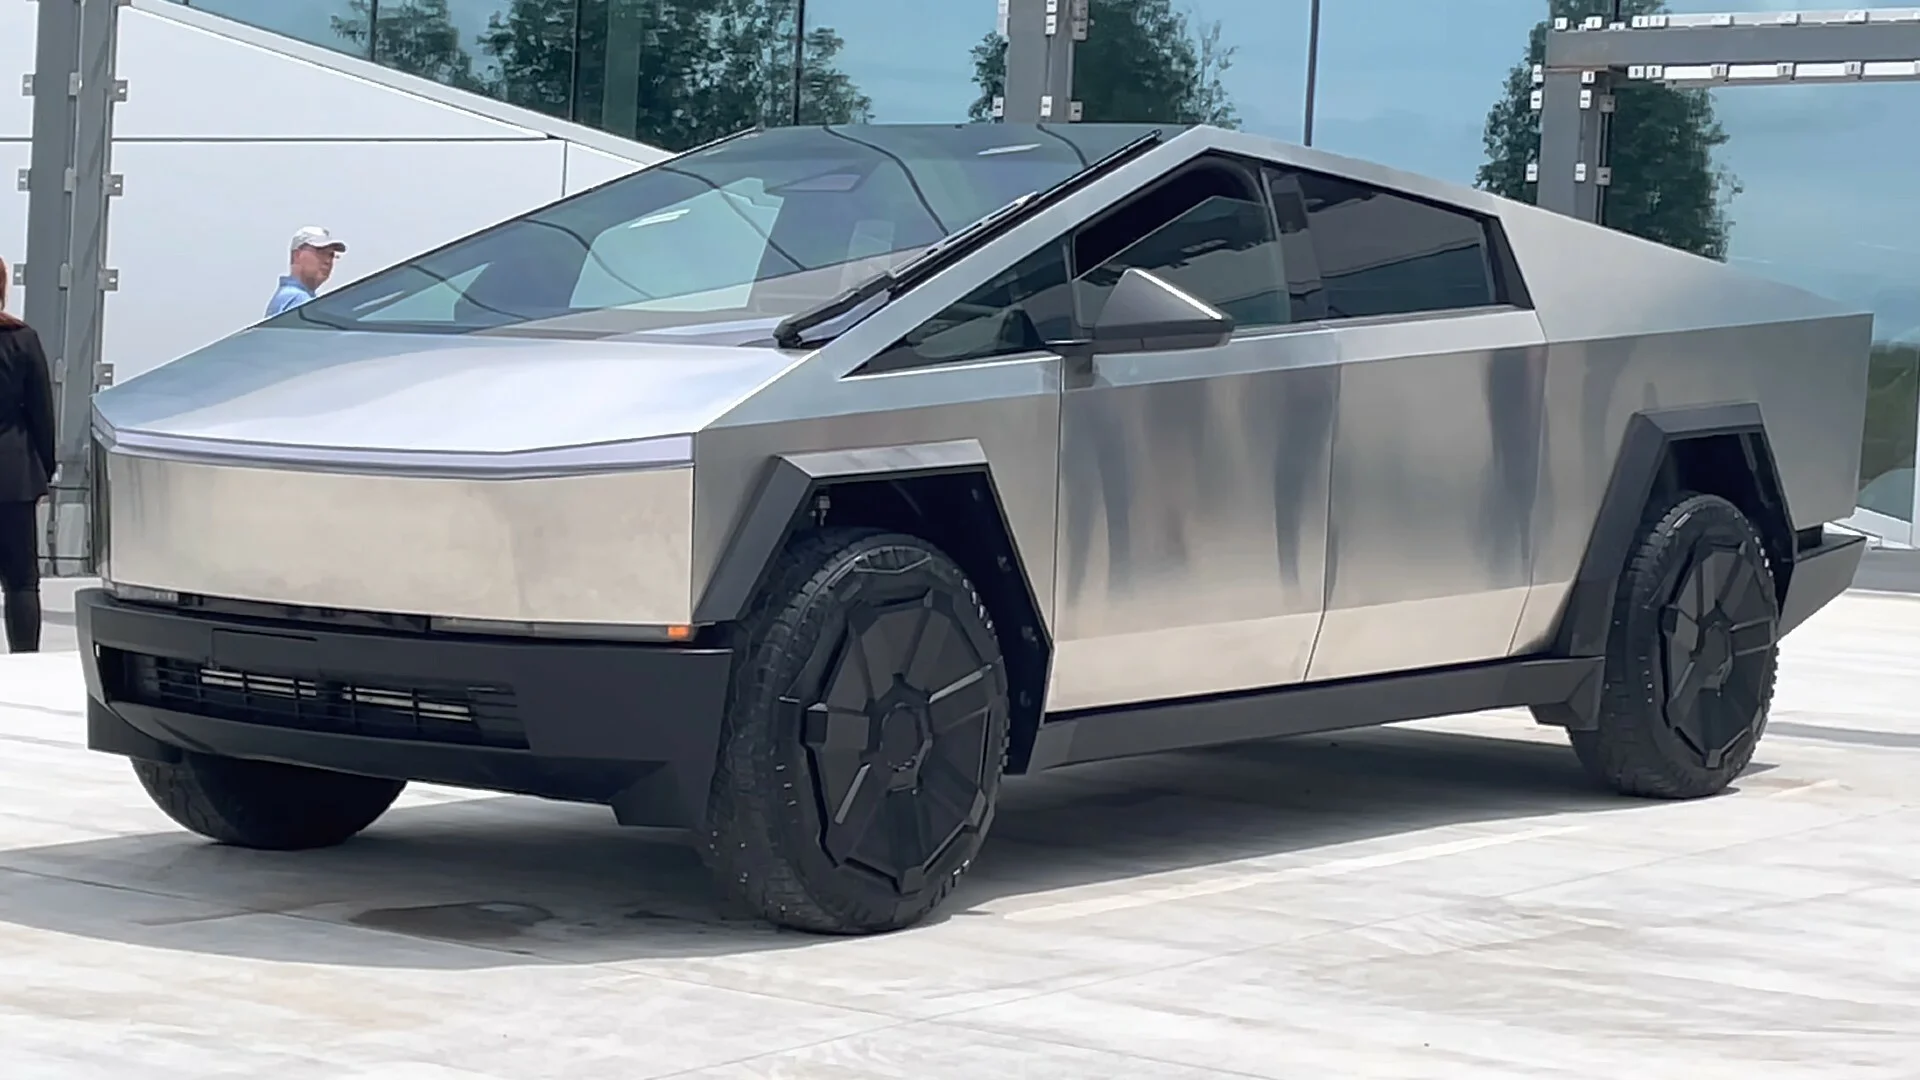 An improved prototype of the Tesla Cybertruck electric pickup truck was demonstrated